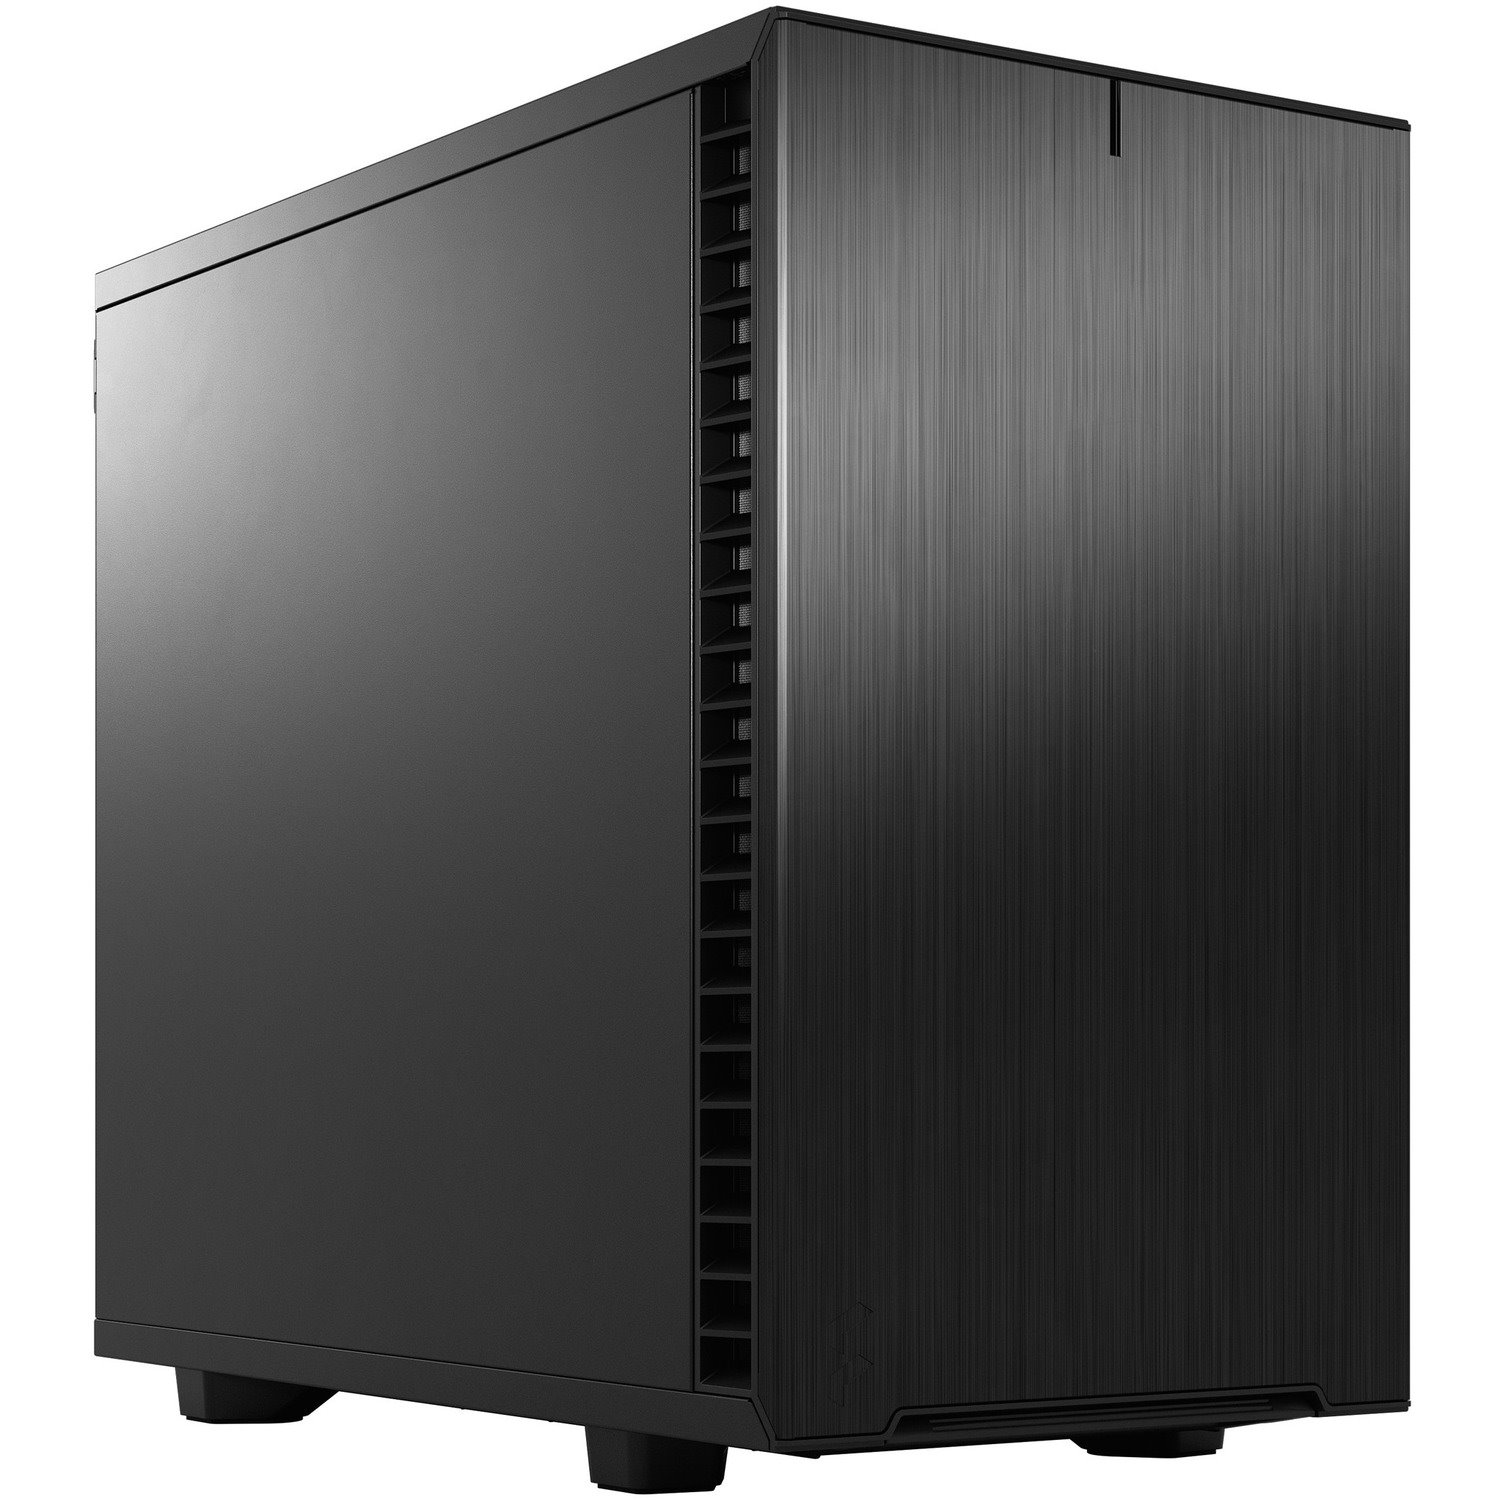 Fractal Design Define 7 Nano Computer Case - Mini DTX, Mini ITX Motherboard Supported - Tower - Steel, Brushed Aluminium - Black Solid